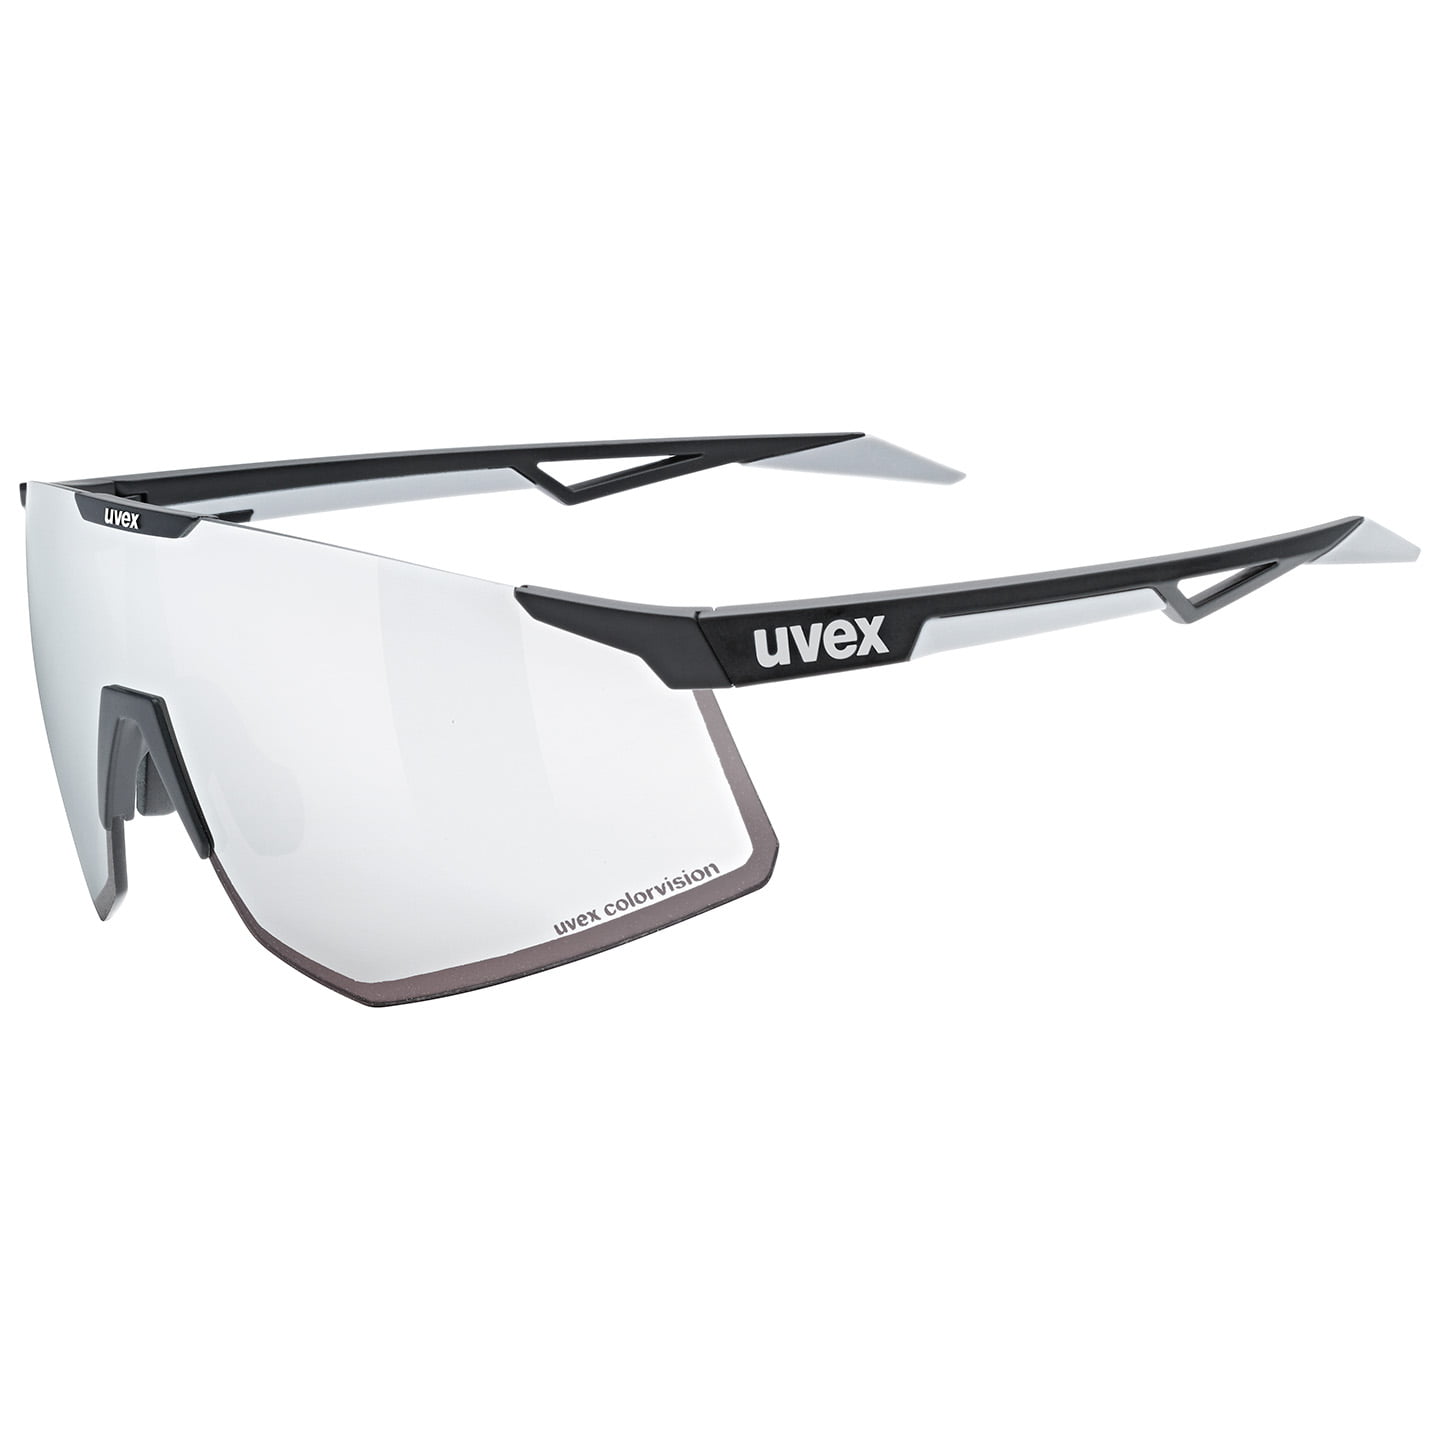 UVEX pace perform CV Cycling Eyewear 2024 Cycling Glasses, Unisex (women / men), Cycle glasses, Road bike accessories